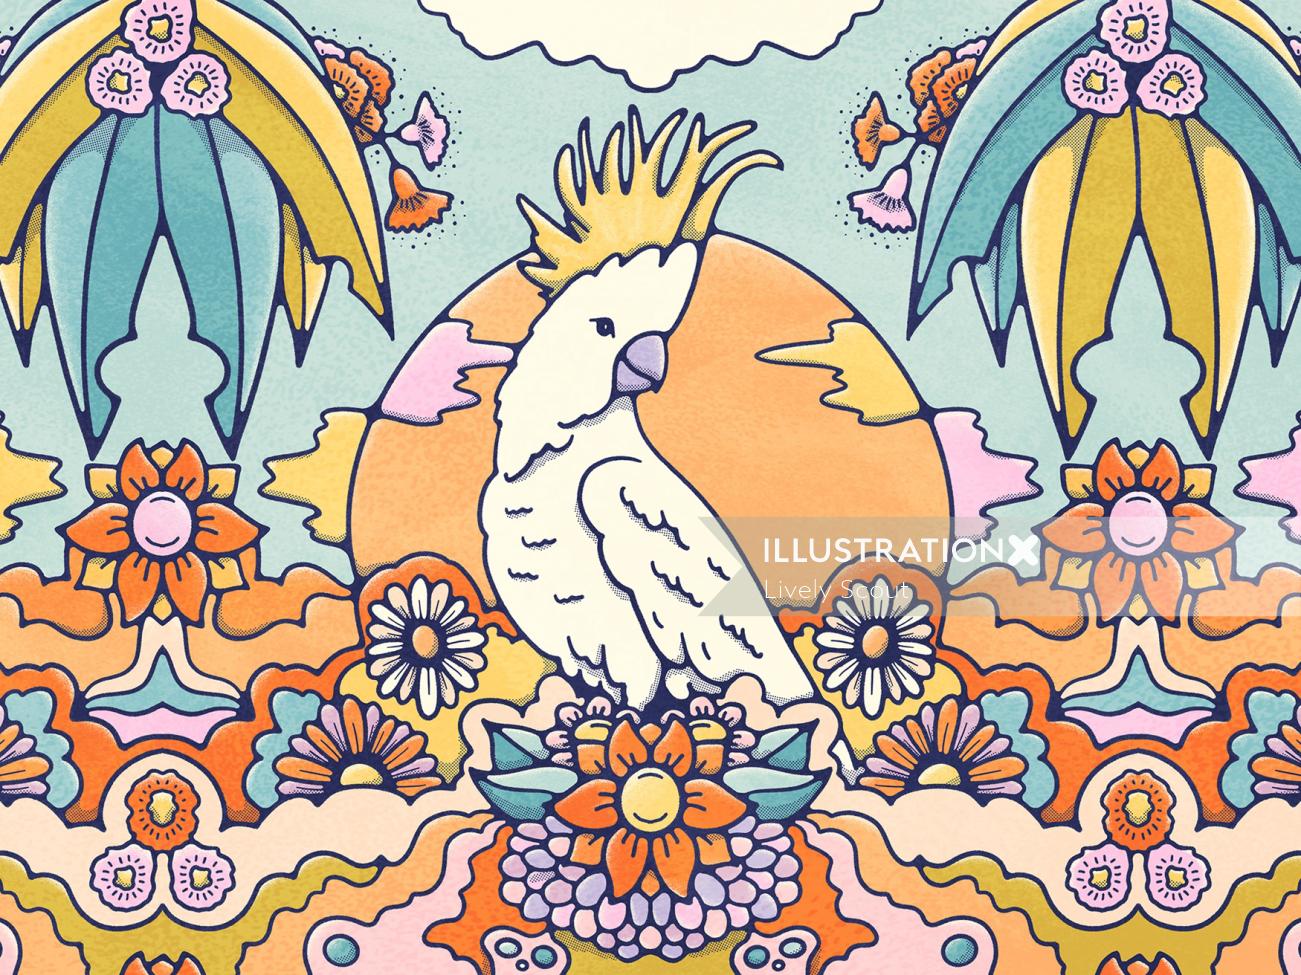 Australian cocktoo bird illustration. perched on a bed of bright coloured flowers, set again an oran